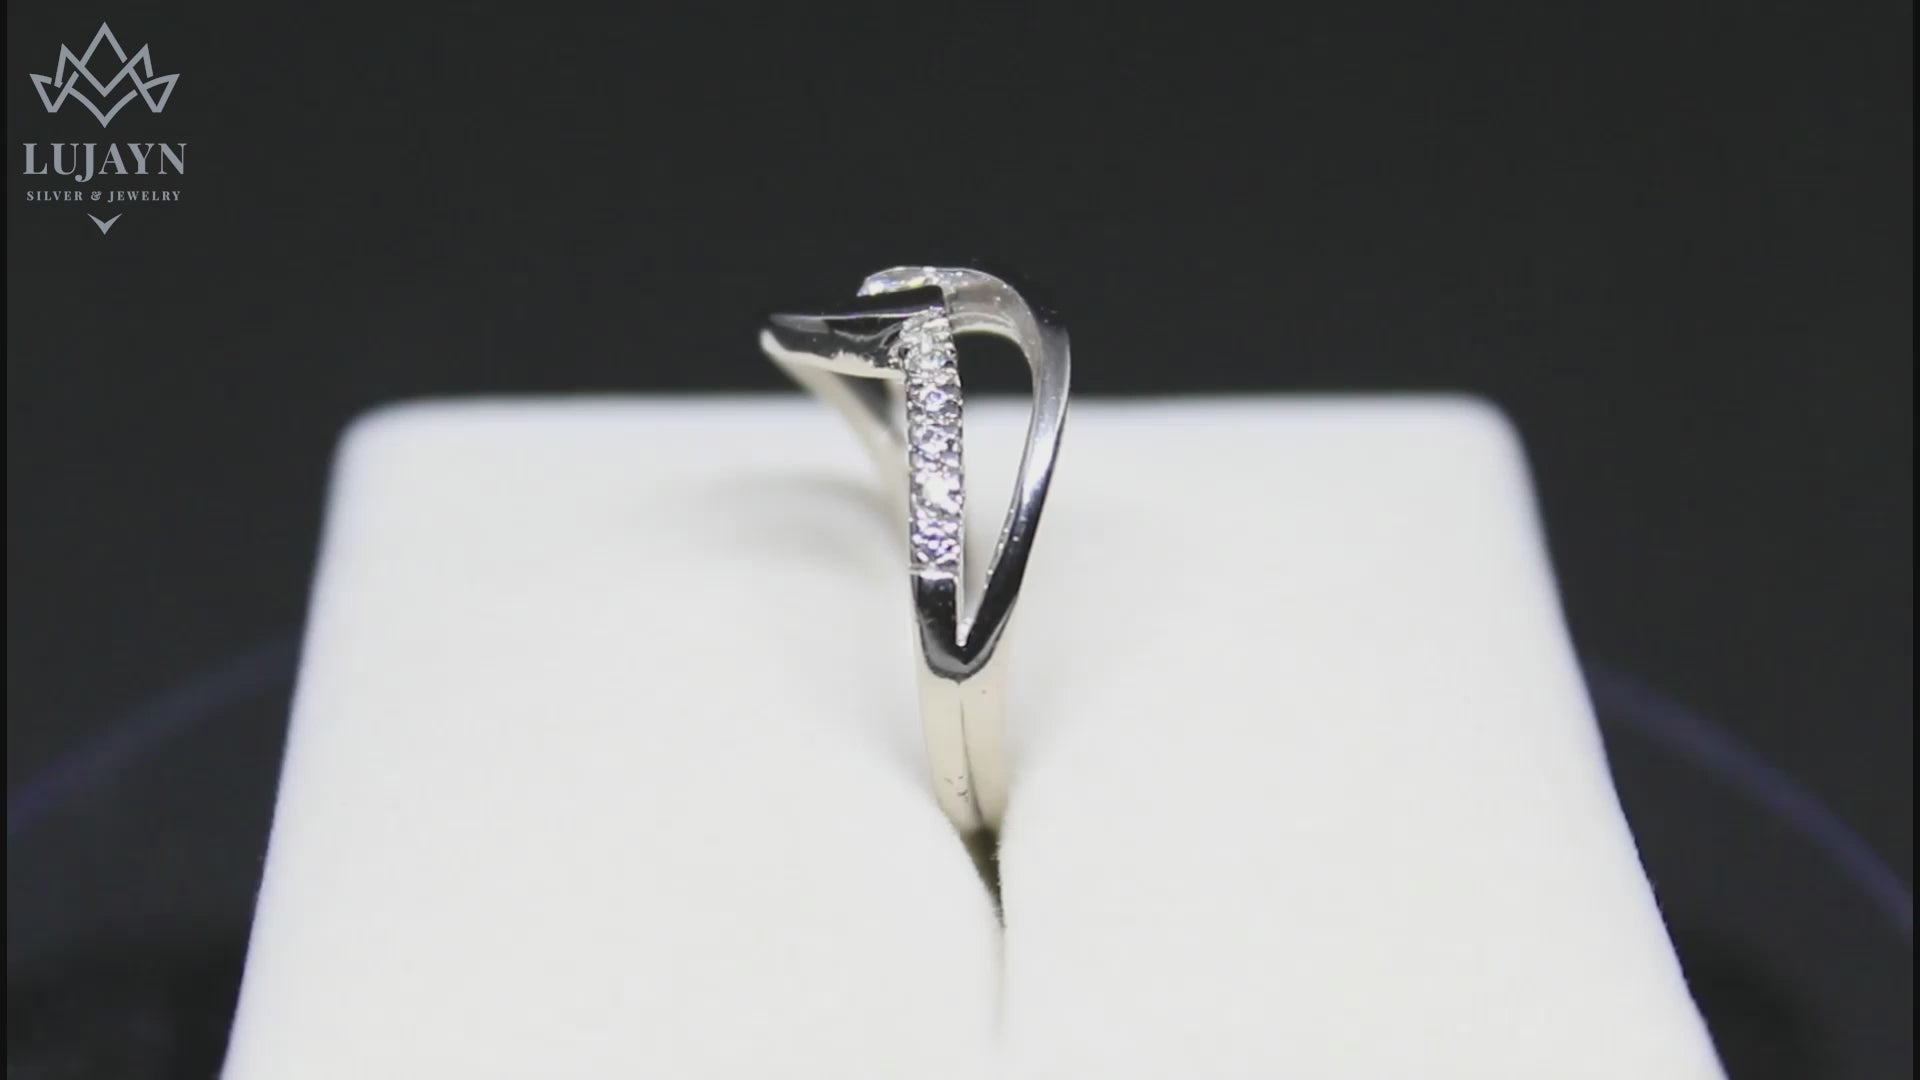 925 sterling silver Ring with Rhodium Plated & Premium Cubic Zircon.